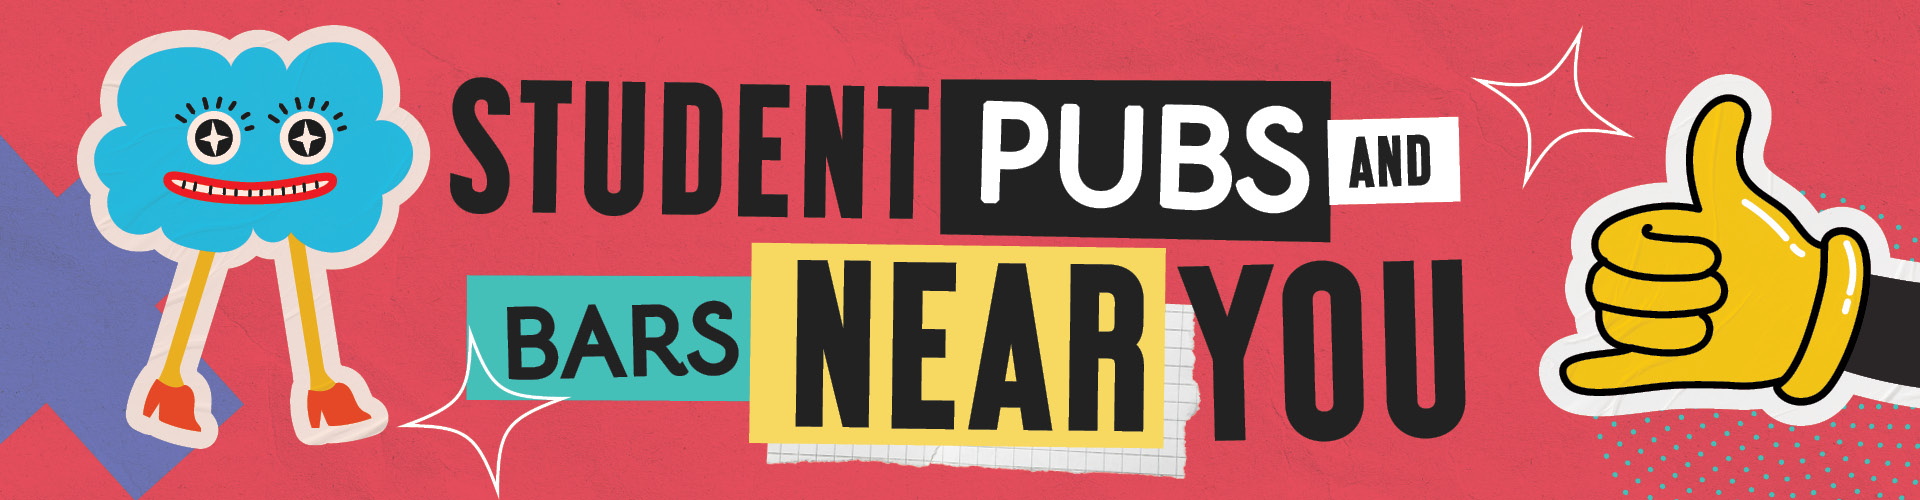 Student pubs and bars near you